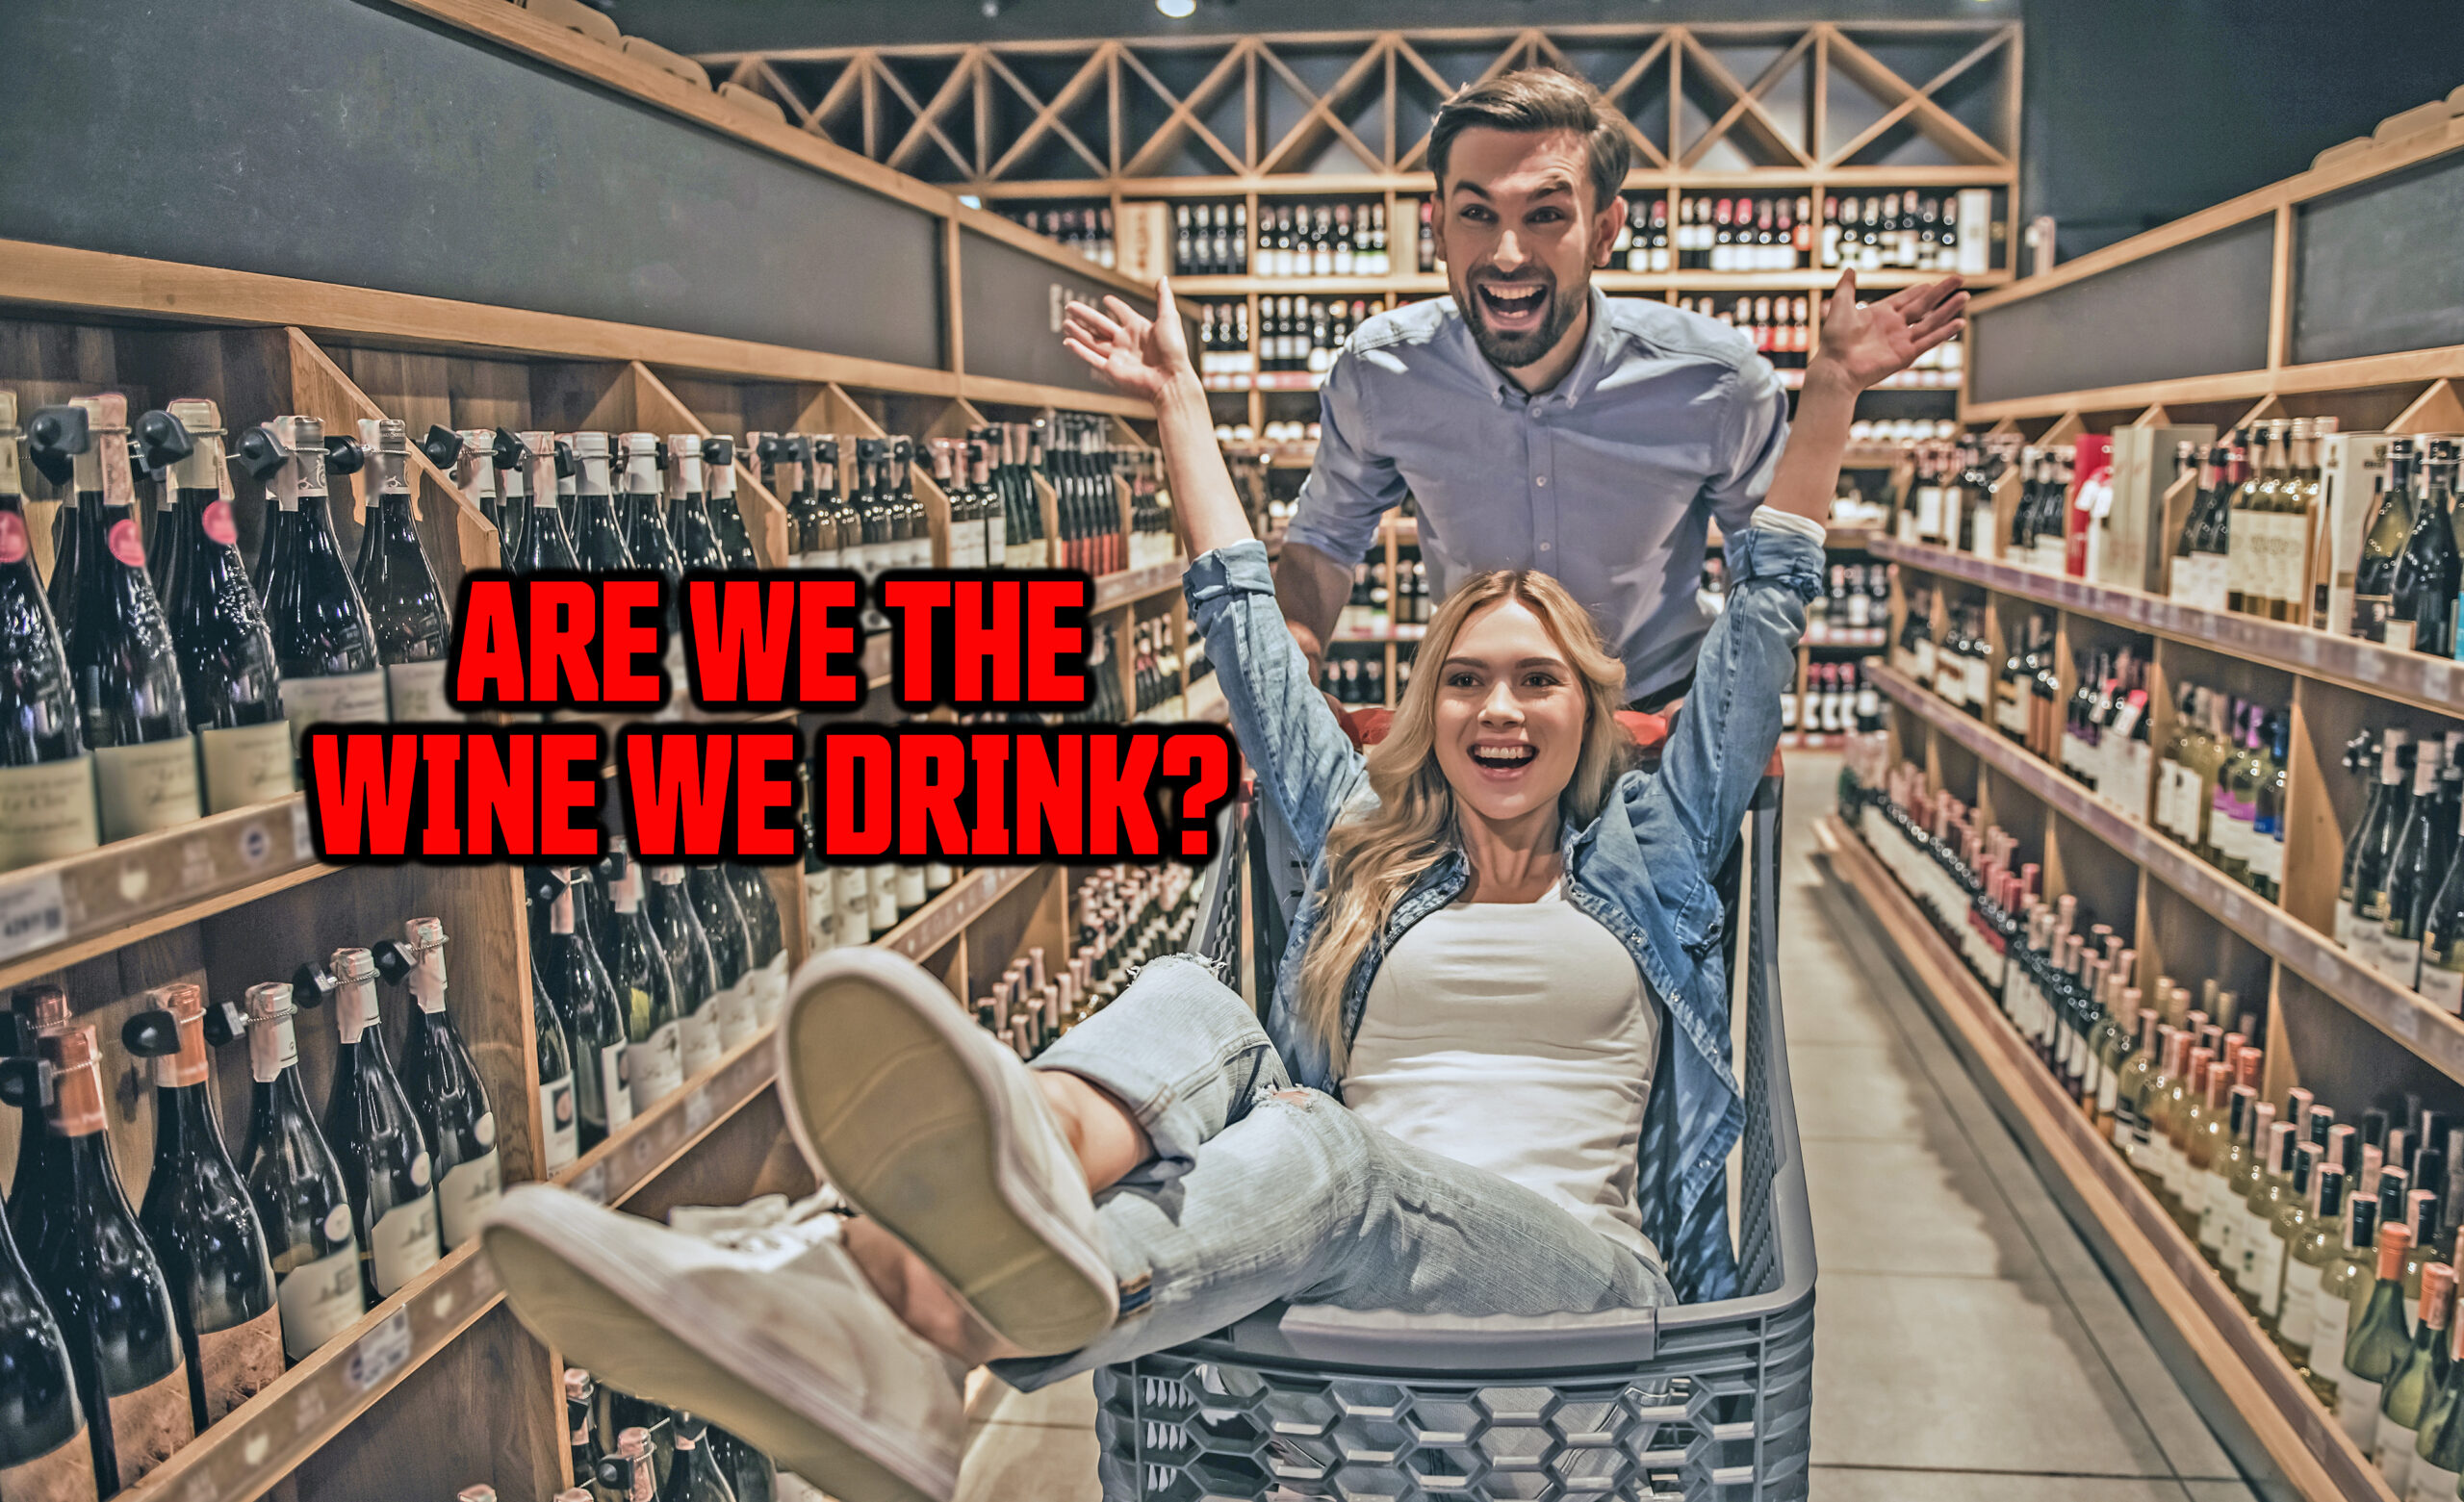 Episode #701 - Don't Laugh!  Maybe We Really Are What We Drink!